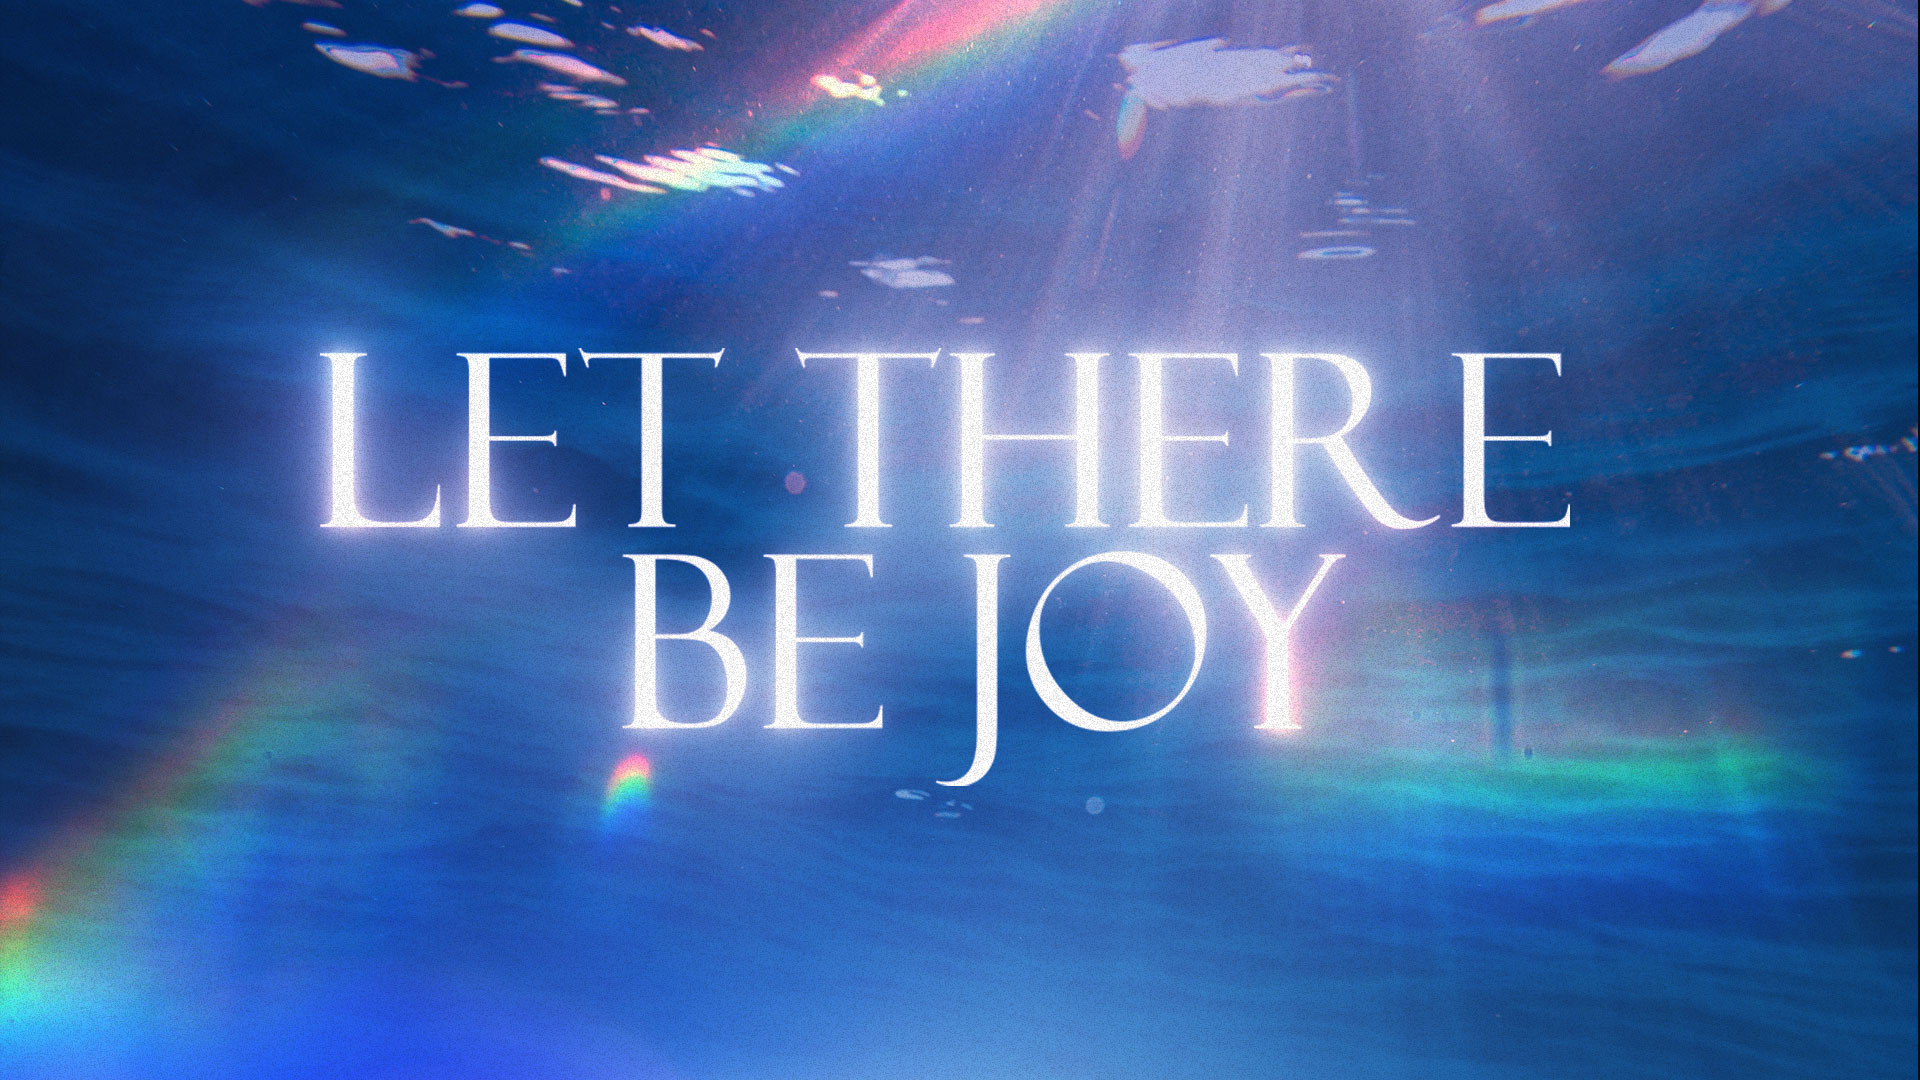 Let There Be Joy